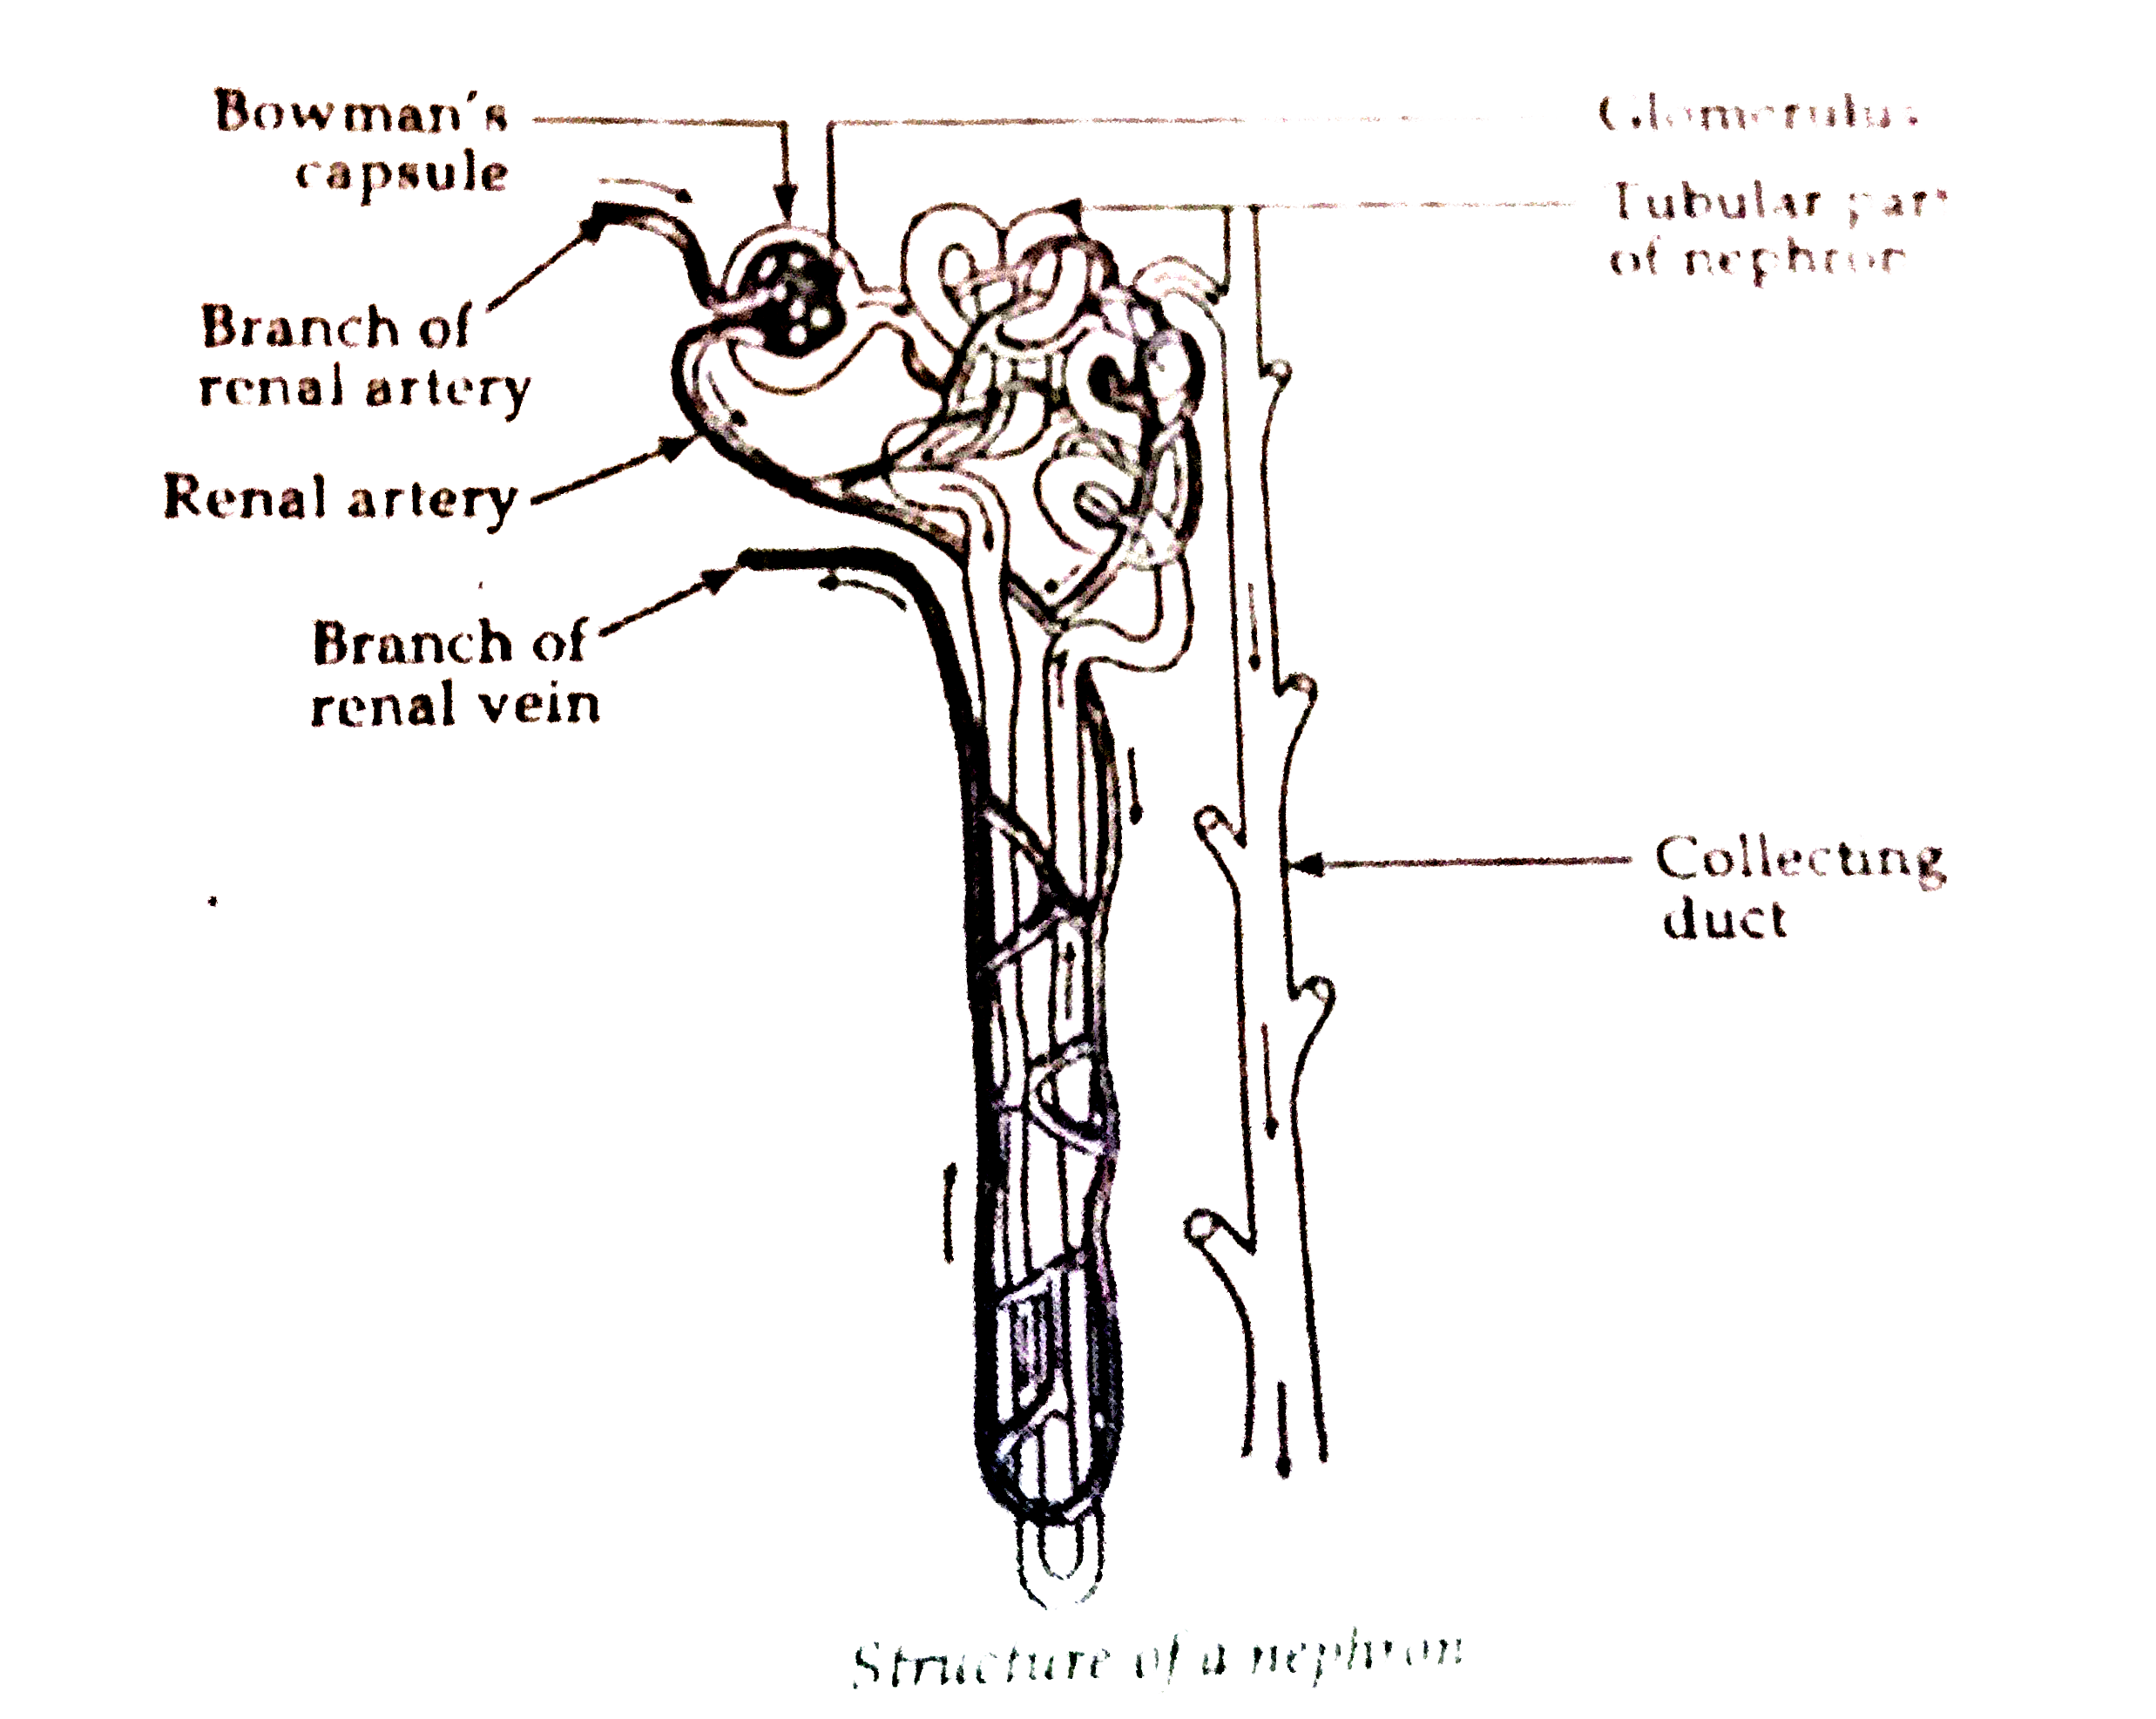 functioning of the nephron